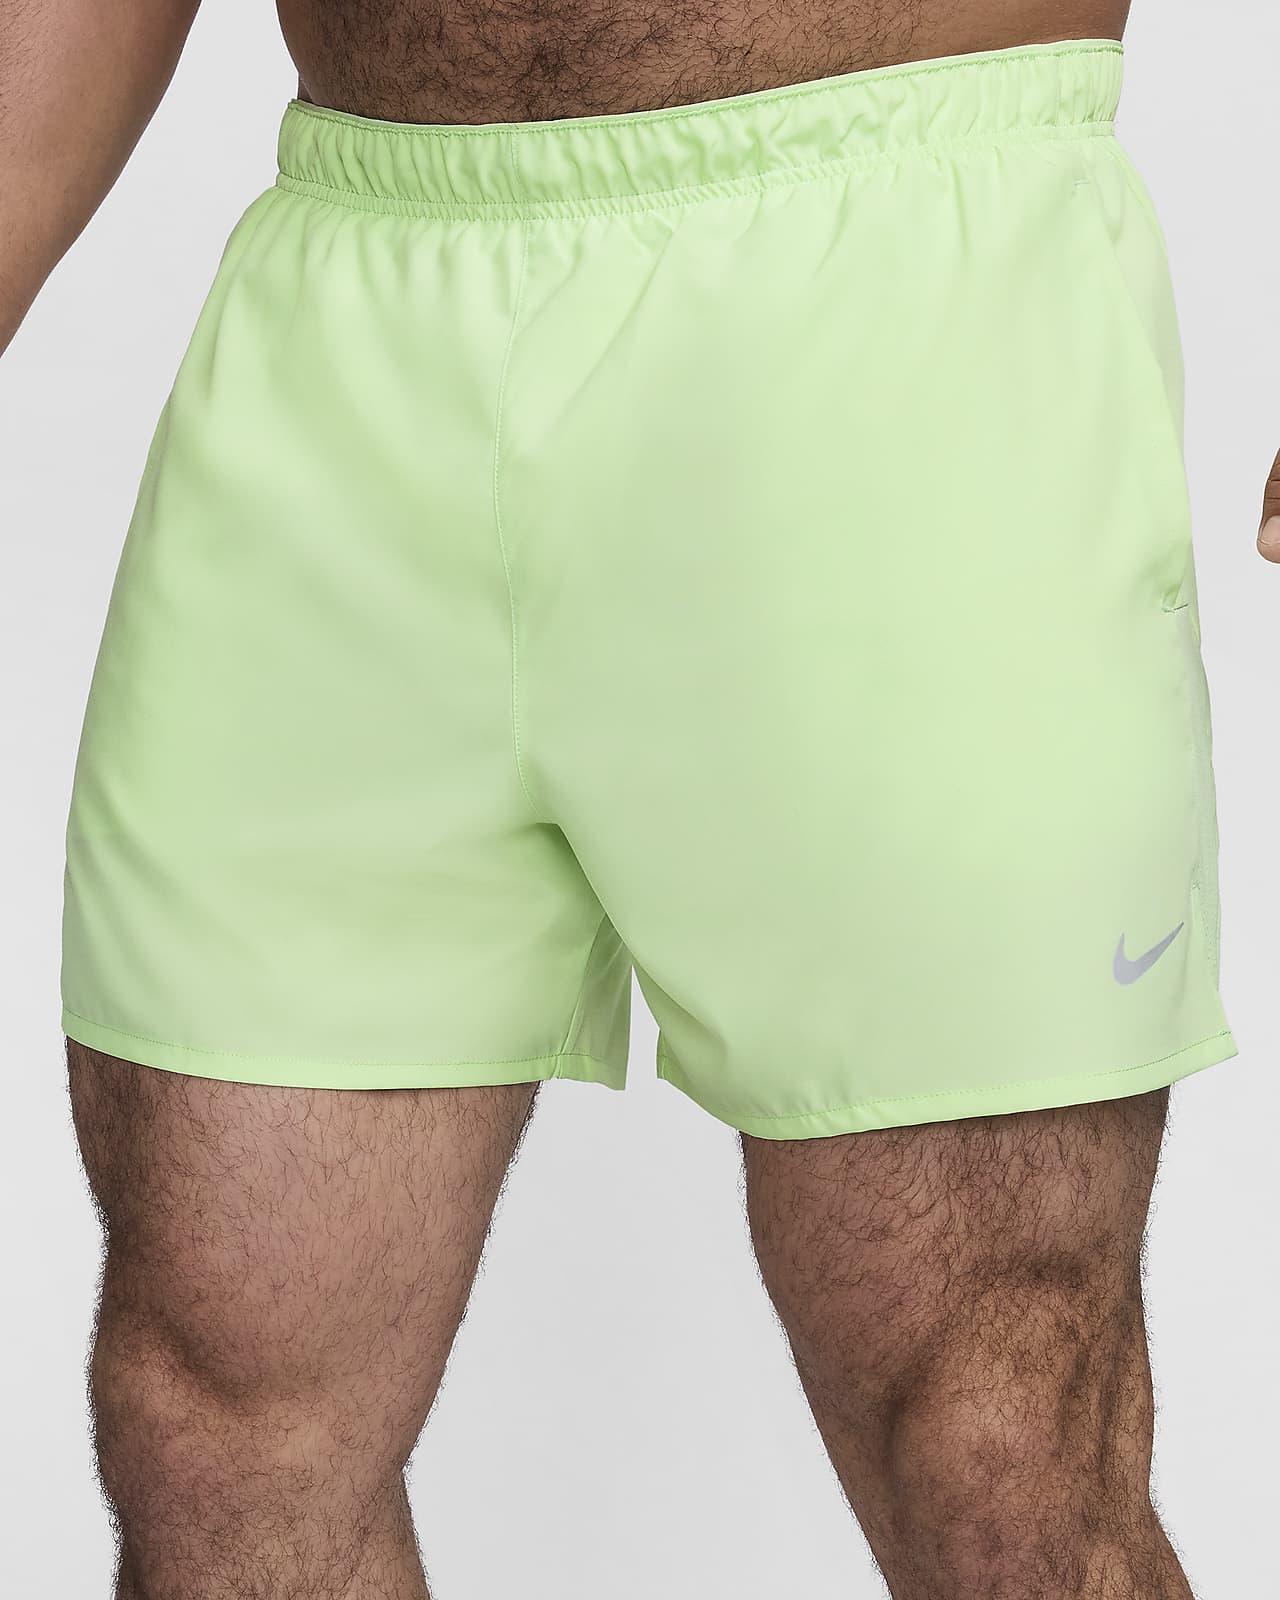 Off To A Good Start Royal Blue Running Shorts – Shop the Mint